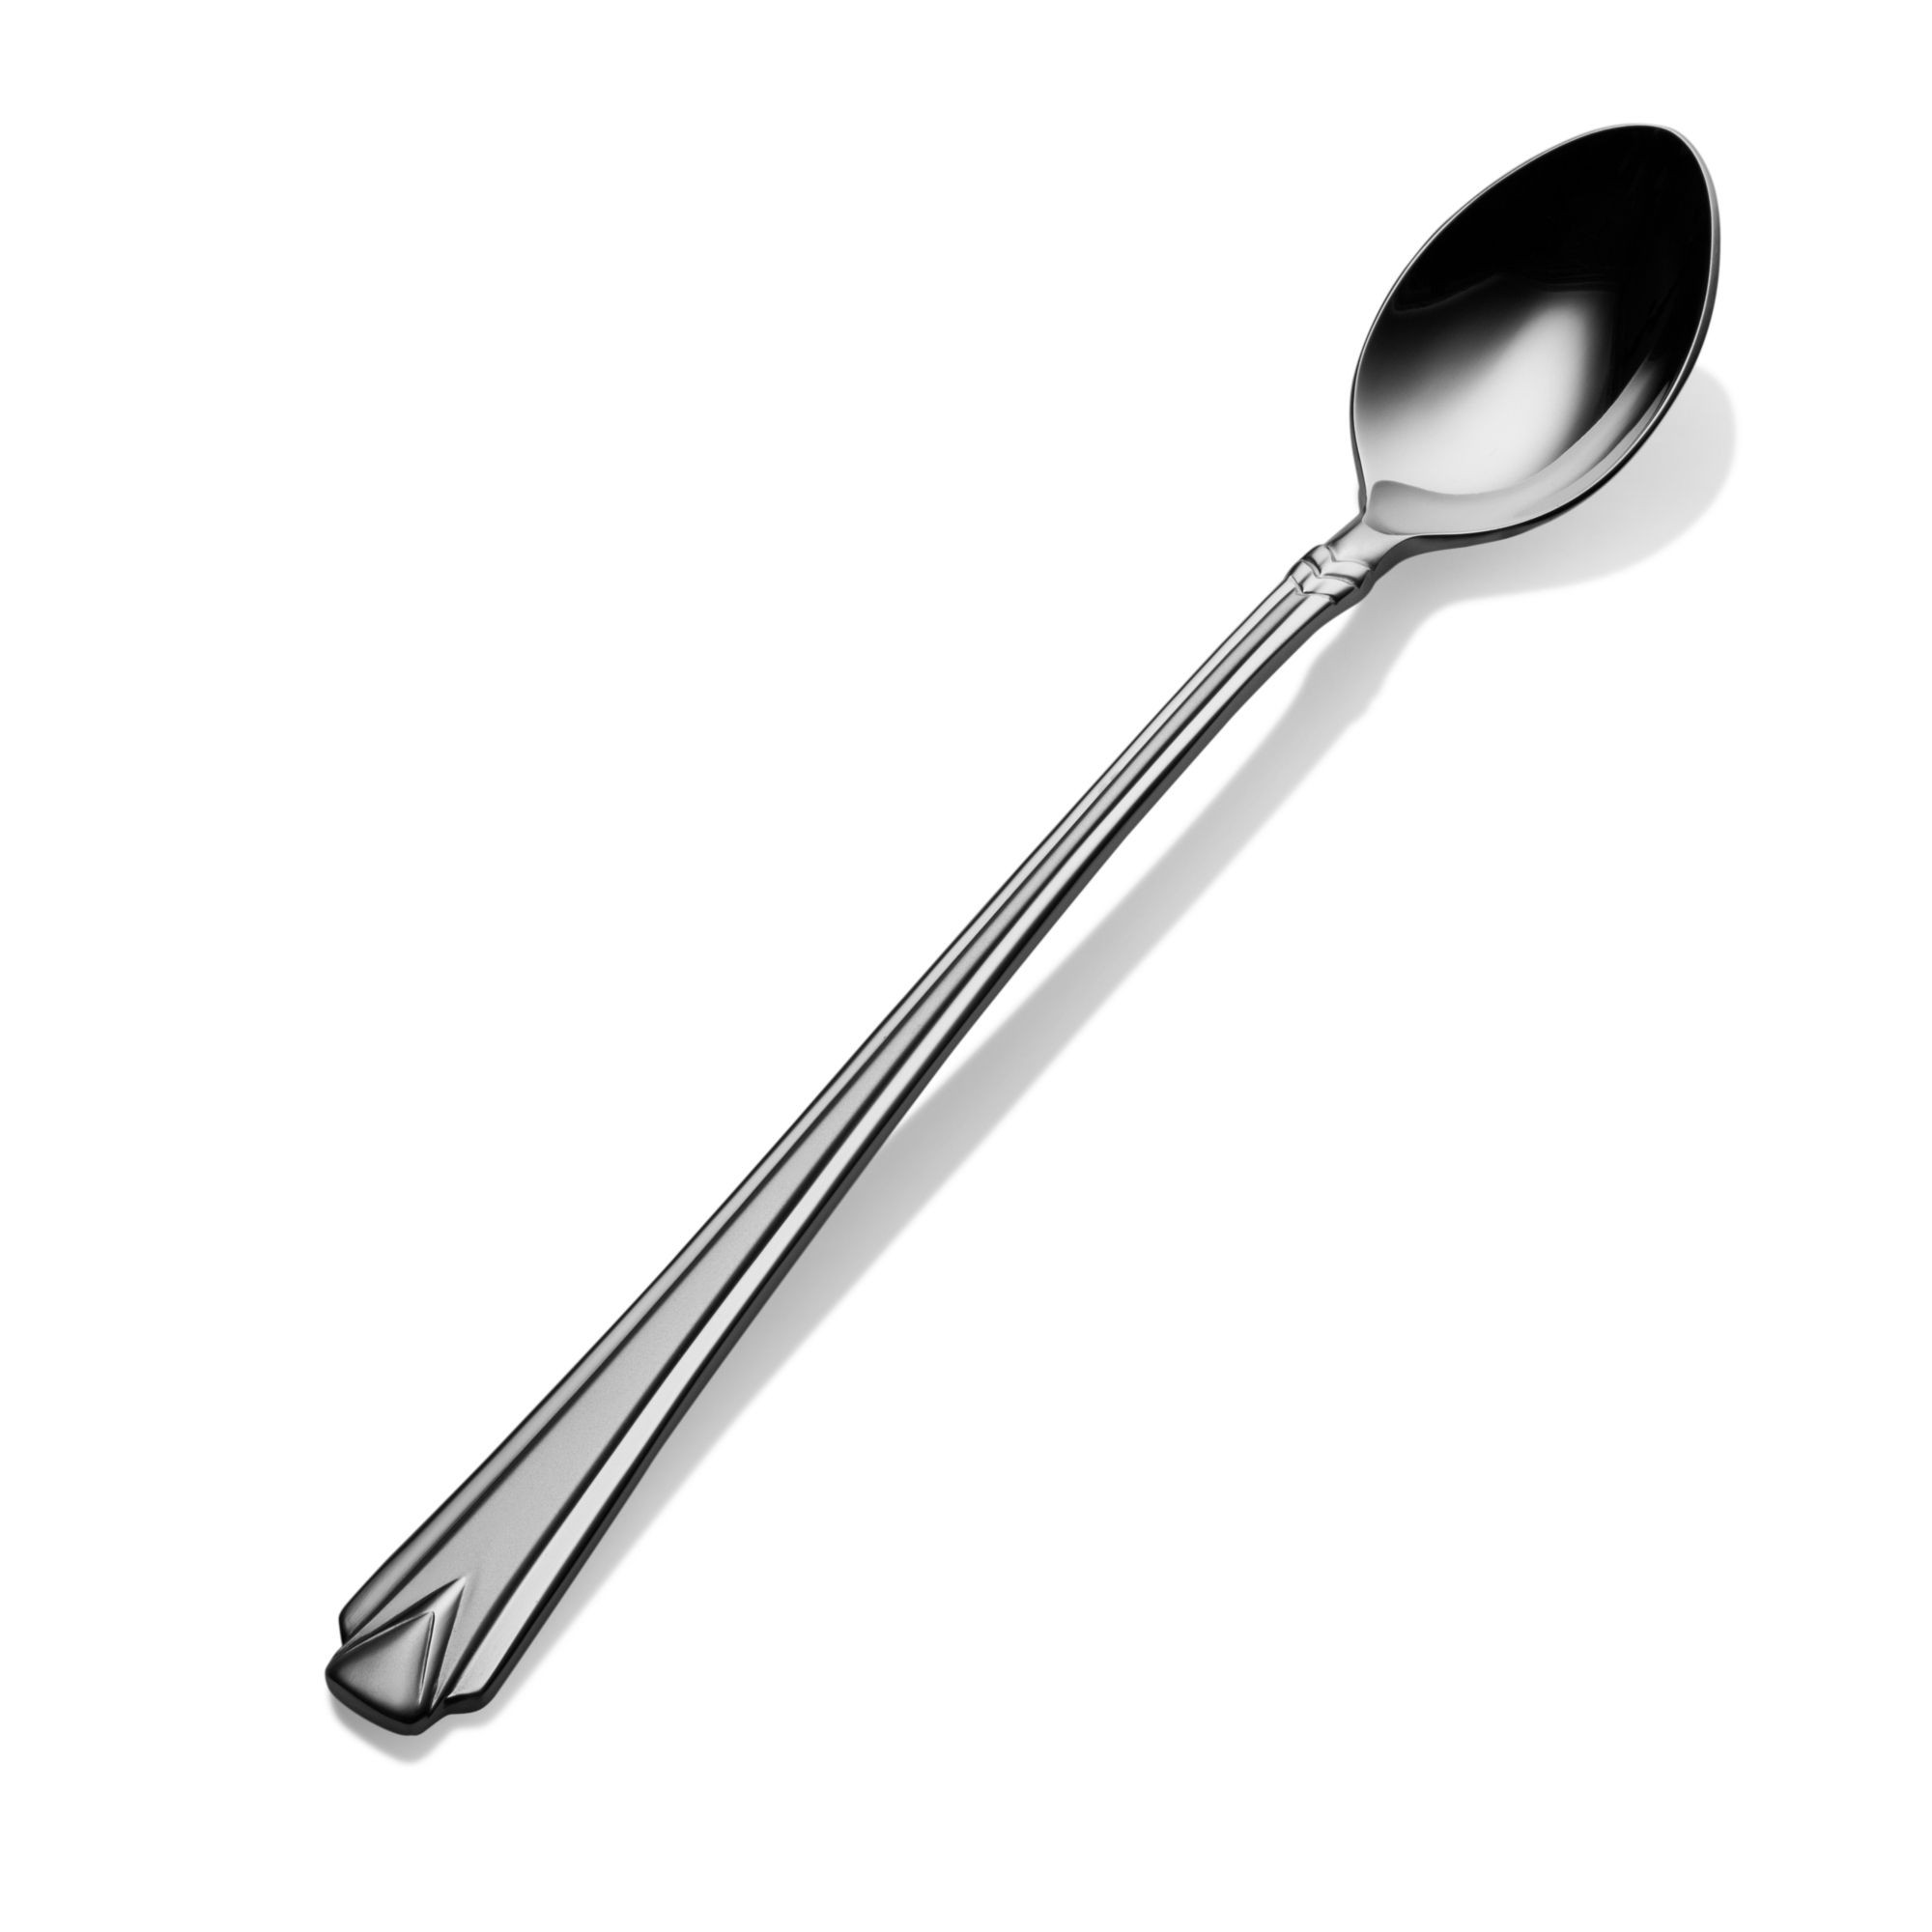 Bon Chef S1302 Gothic 18/8 Stainless Steel Iced Tea Spoon